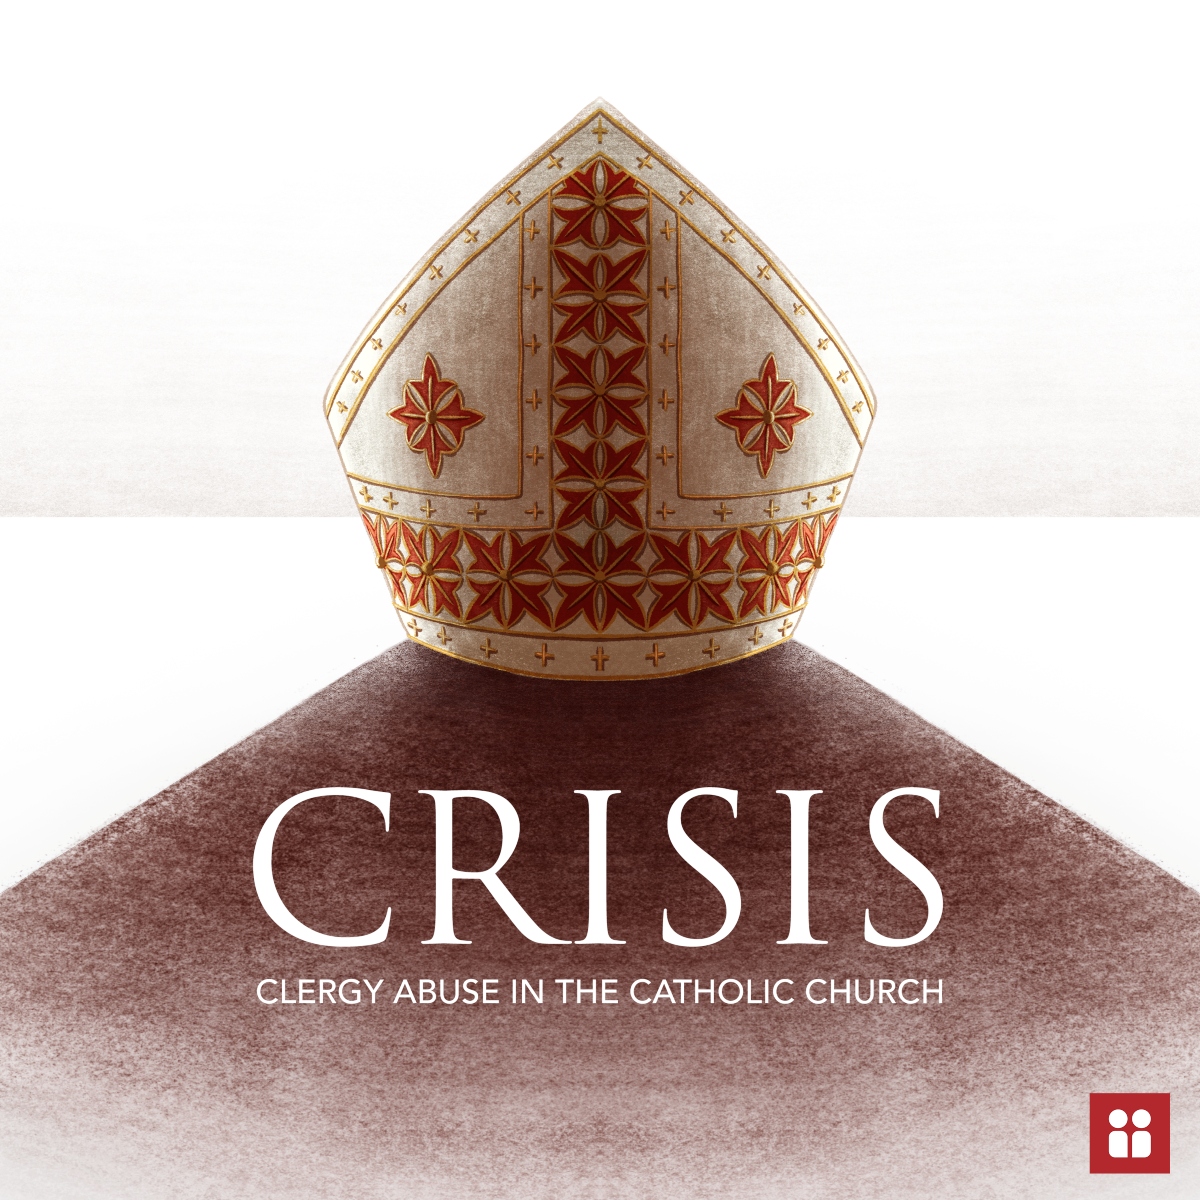 Crisis: Clergy Abuse in the Catholic Church